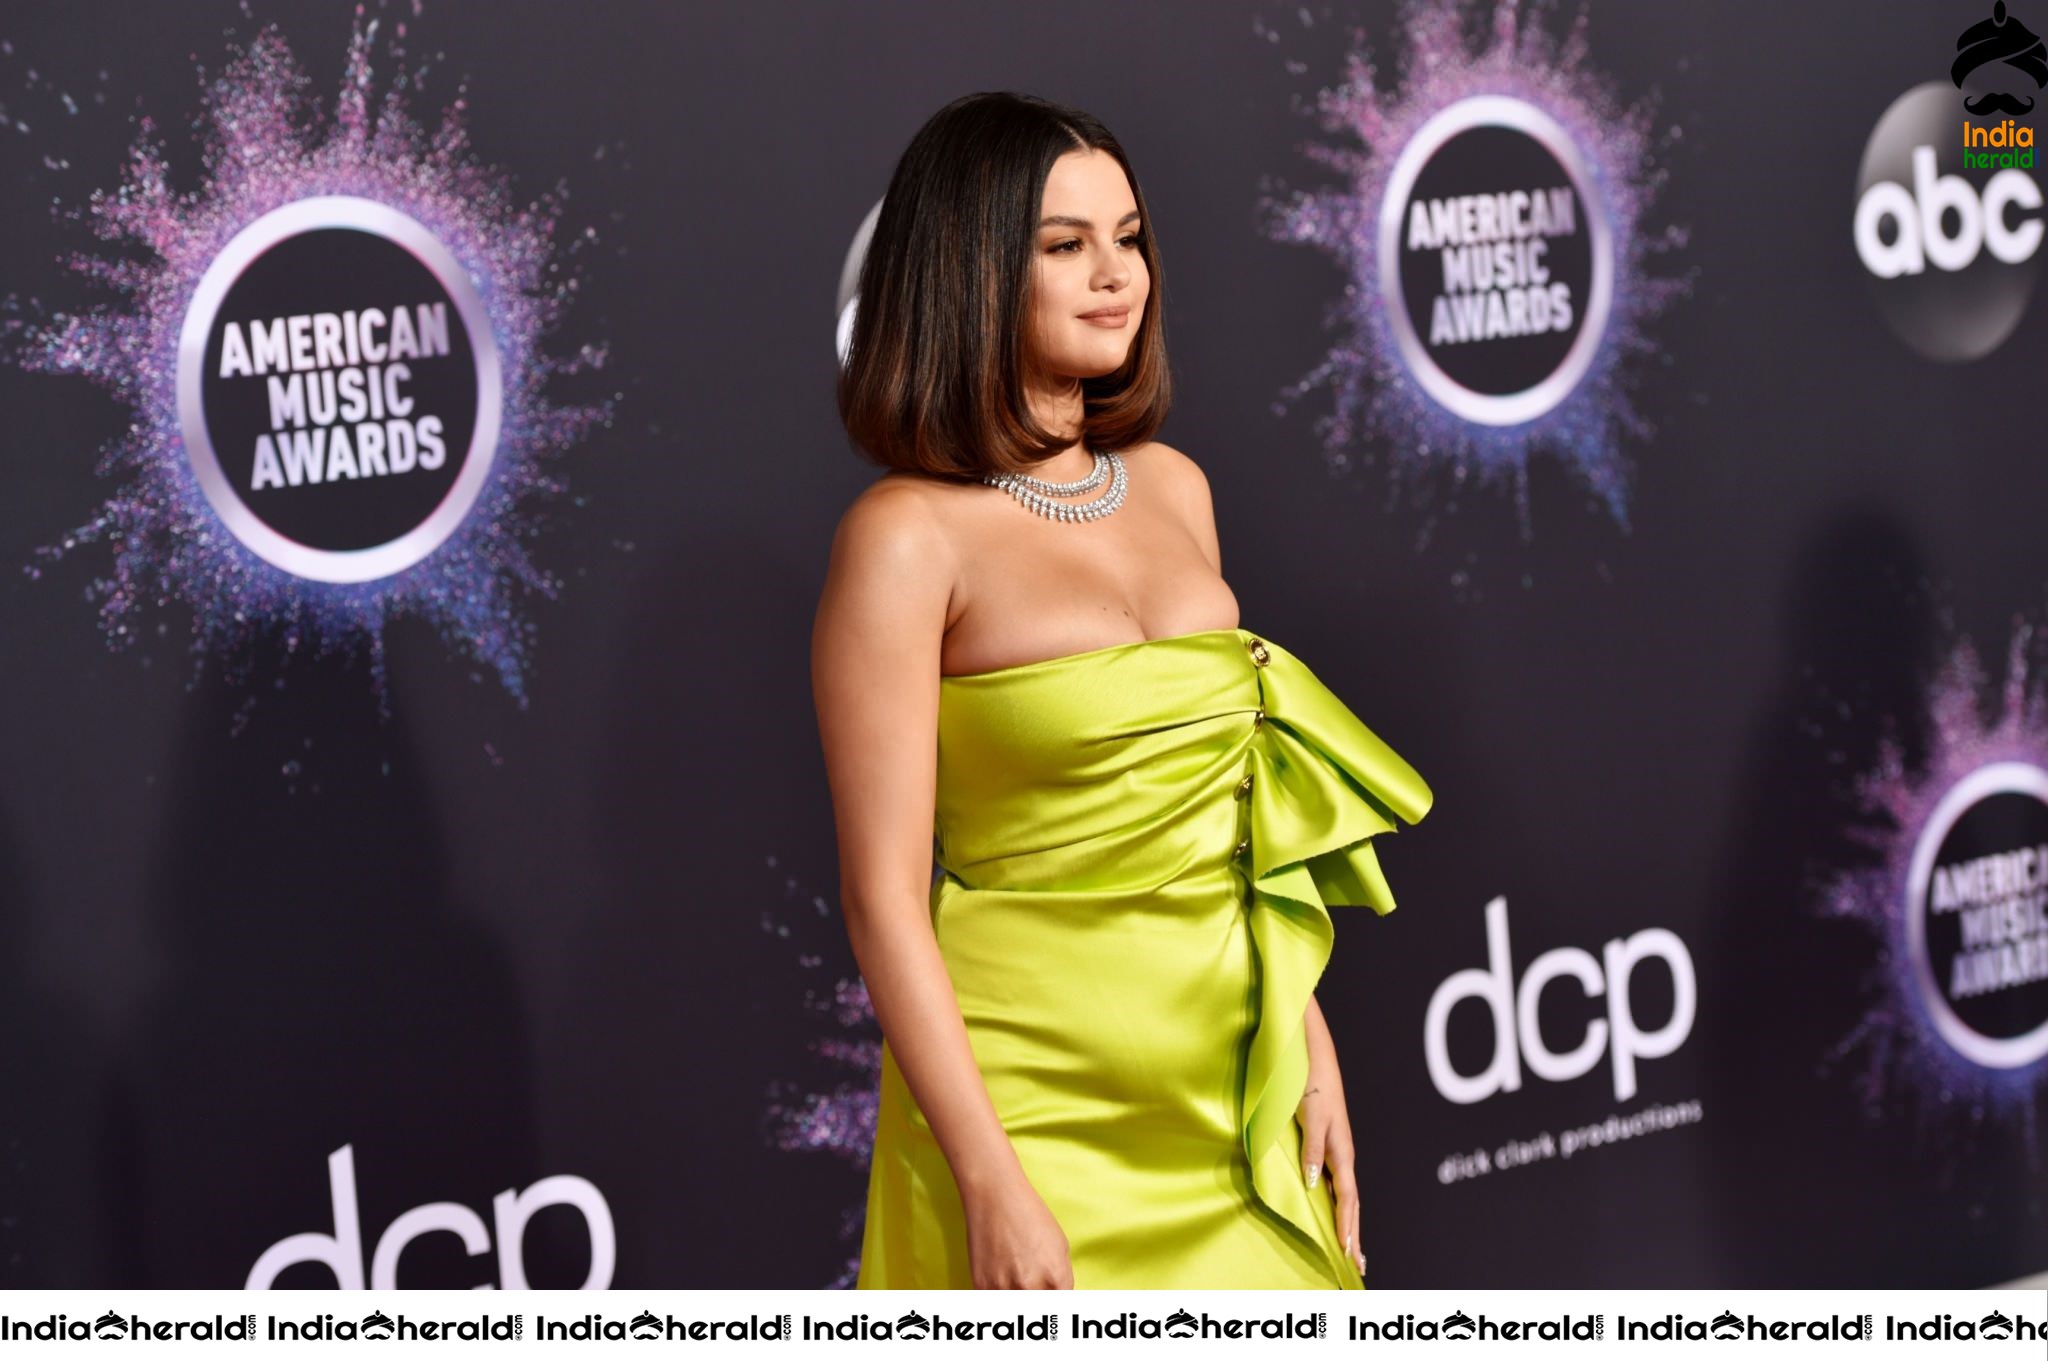 Selena Gomez at the 2019 American Music Awards in Los Angeles Set 1